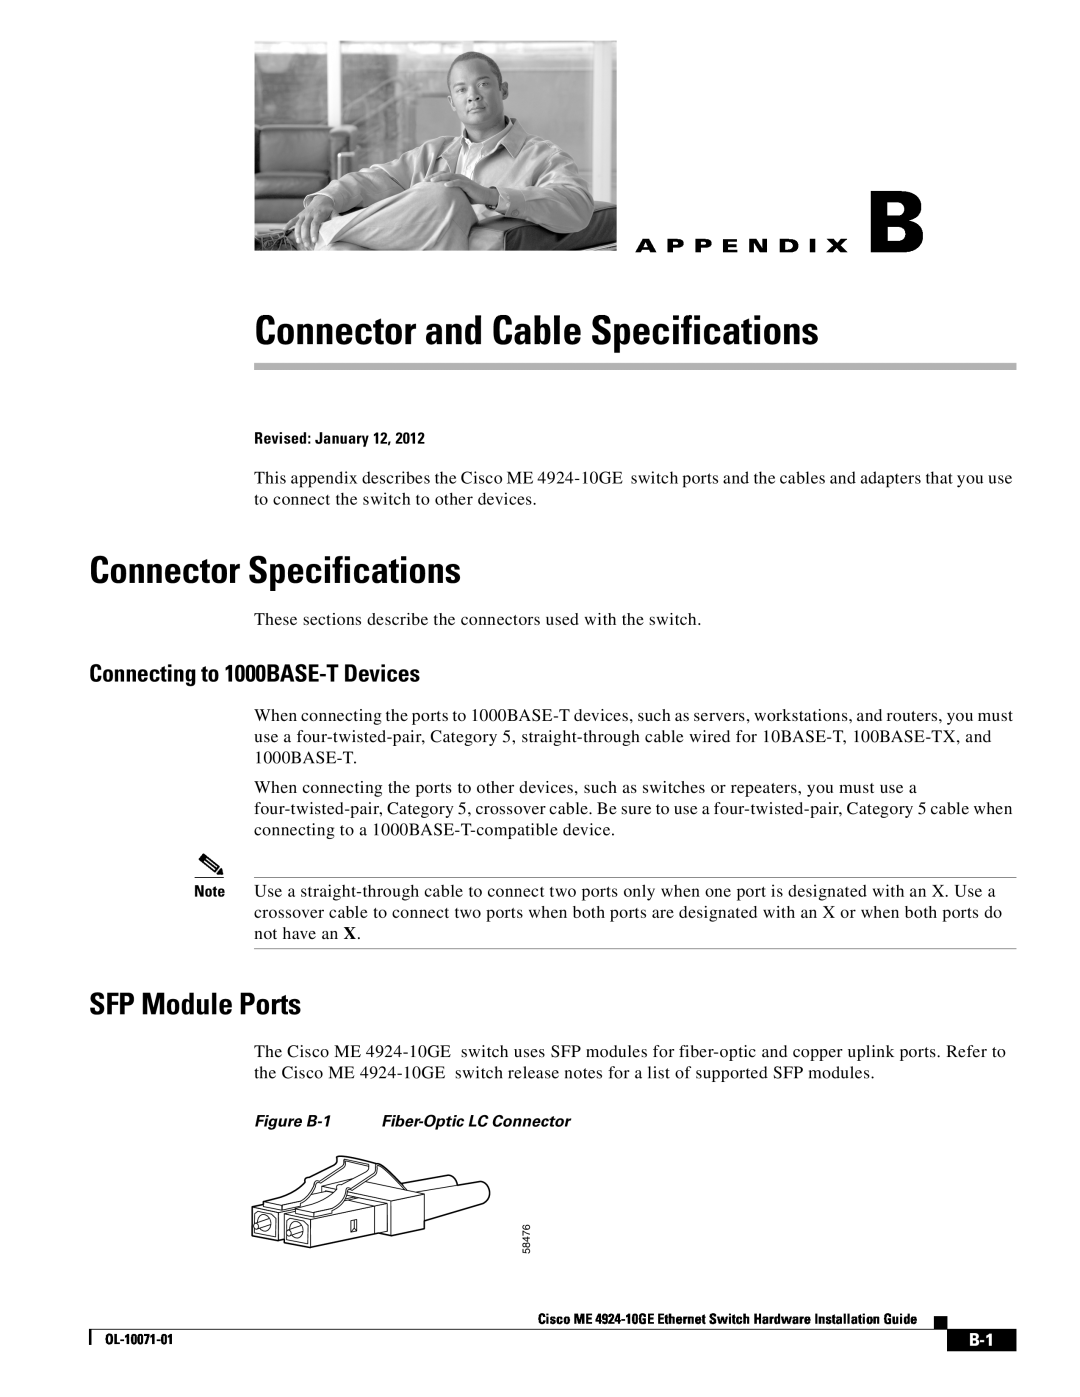 Casio ACSDSBUASYN appendix Connector Specifications, SFP Module Ports, Connecting to 1000BASE-T Devices, A P P E N D I X B 